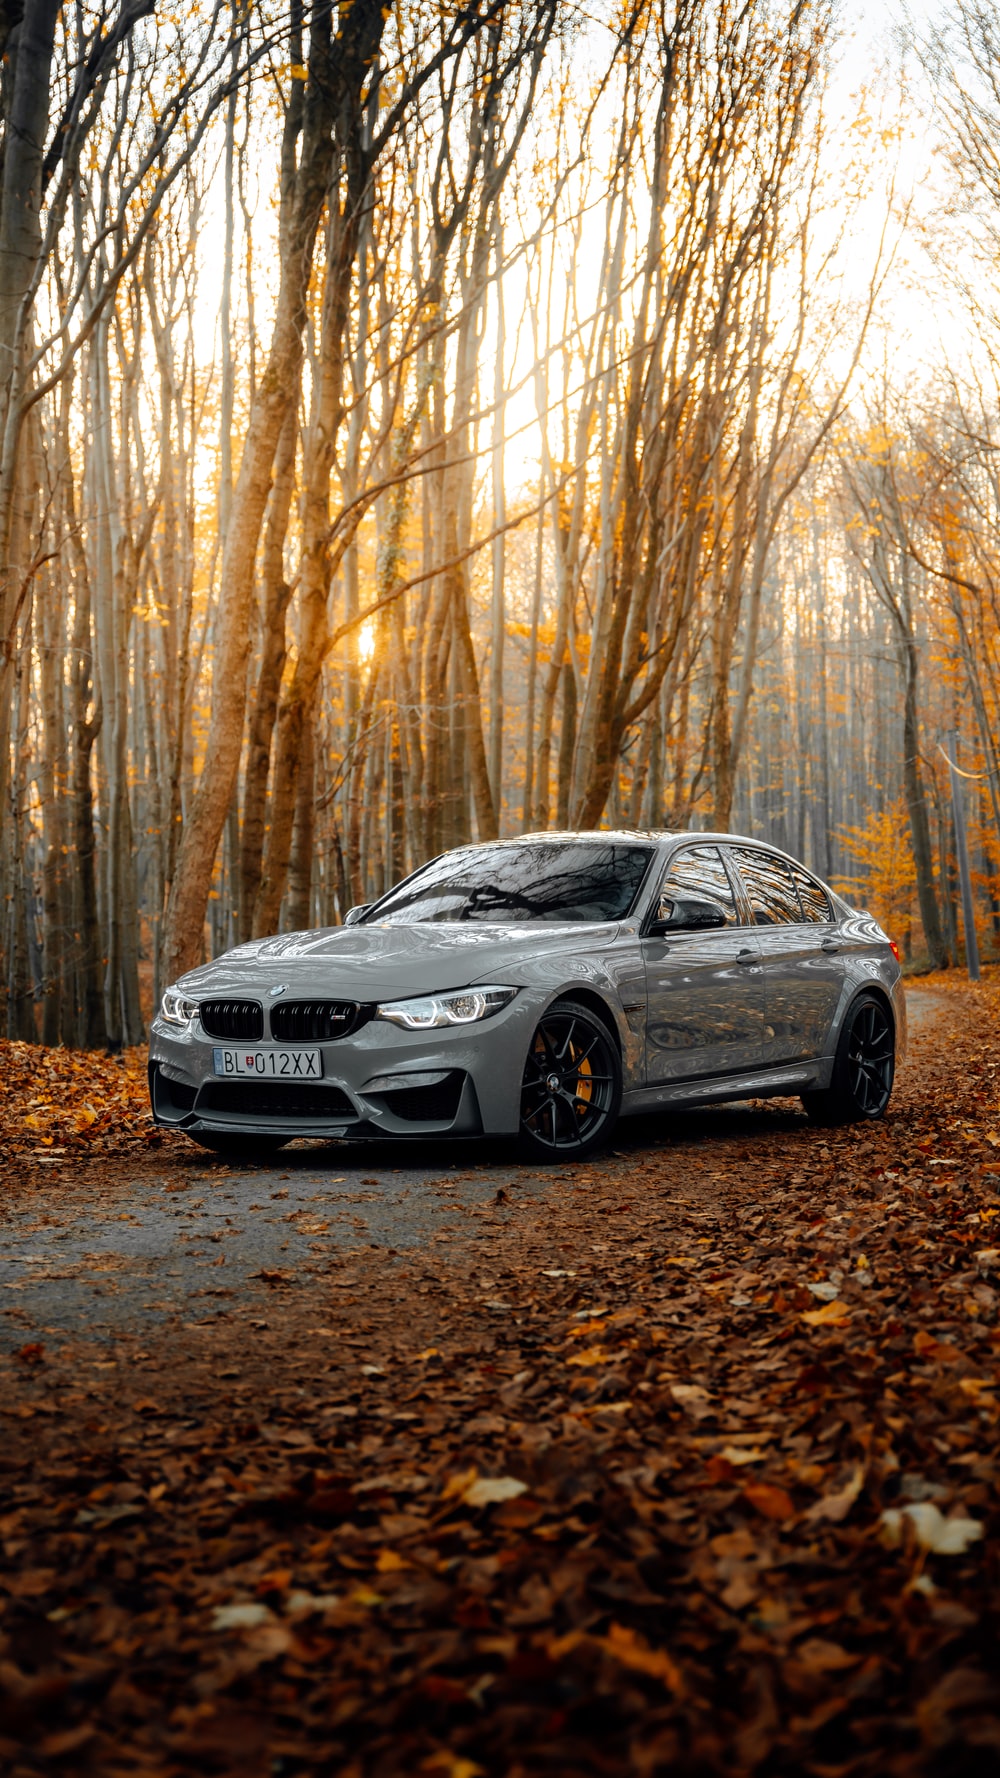 Car In Forest Picture. Download Free Image